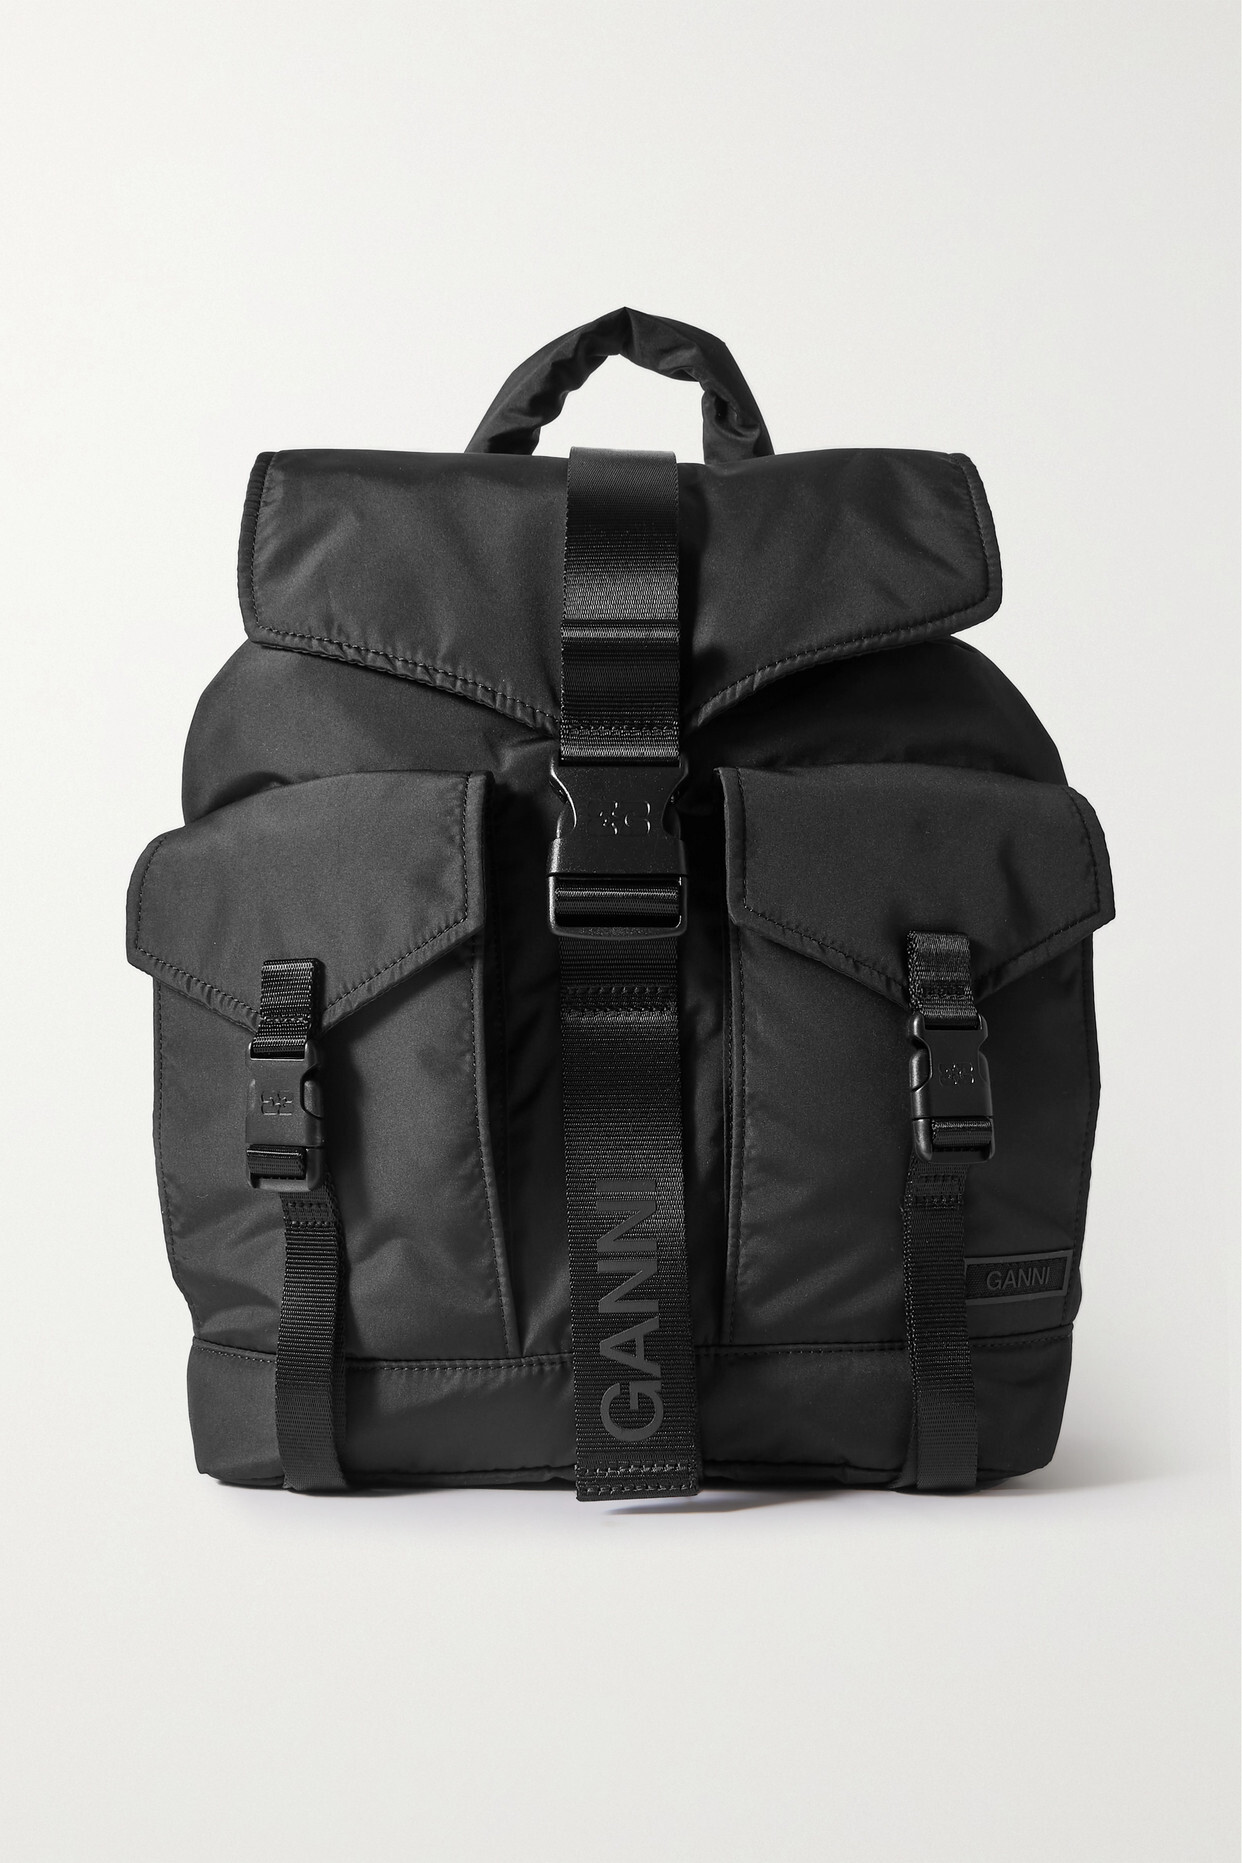 GANNI - Recycled-shell Backpack - Black